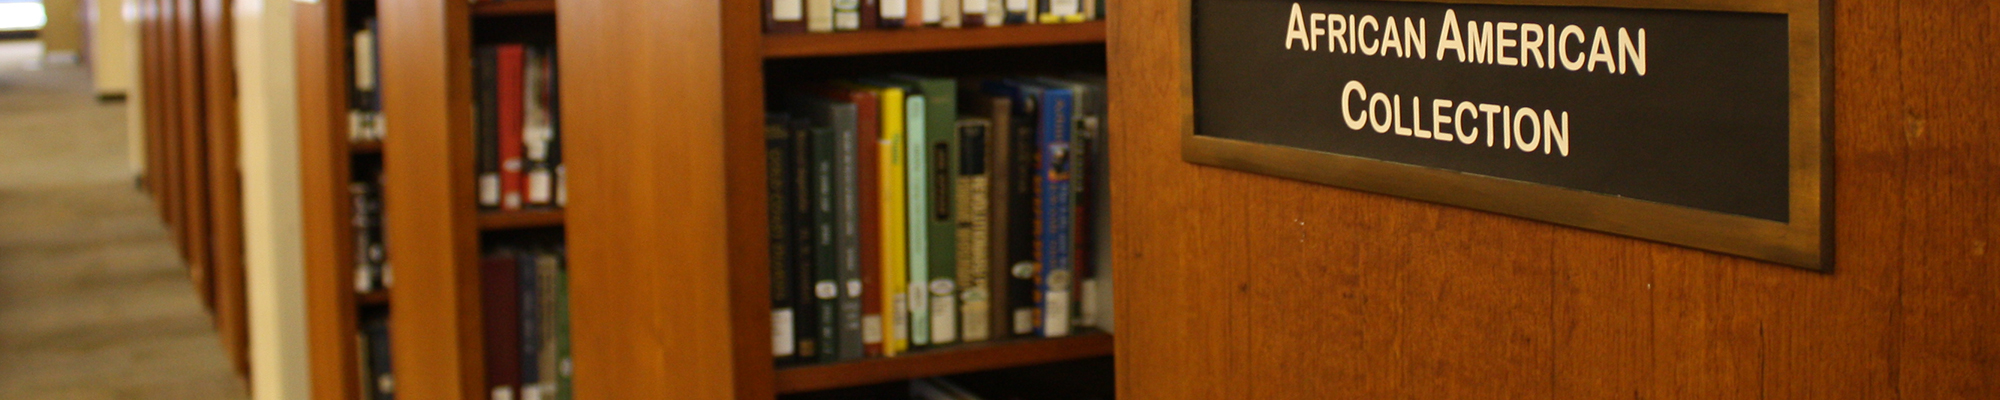 A close-up of the African American Collections sign on the bookshelves in Hillman Library